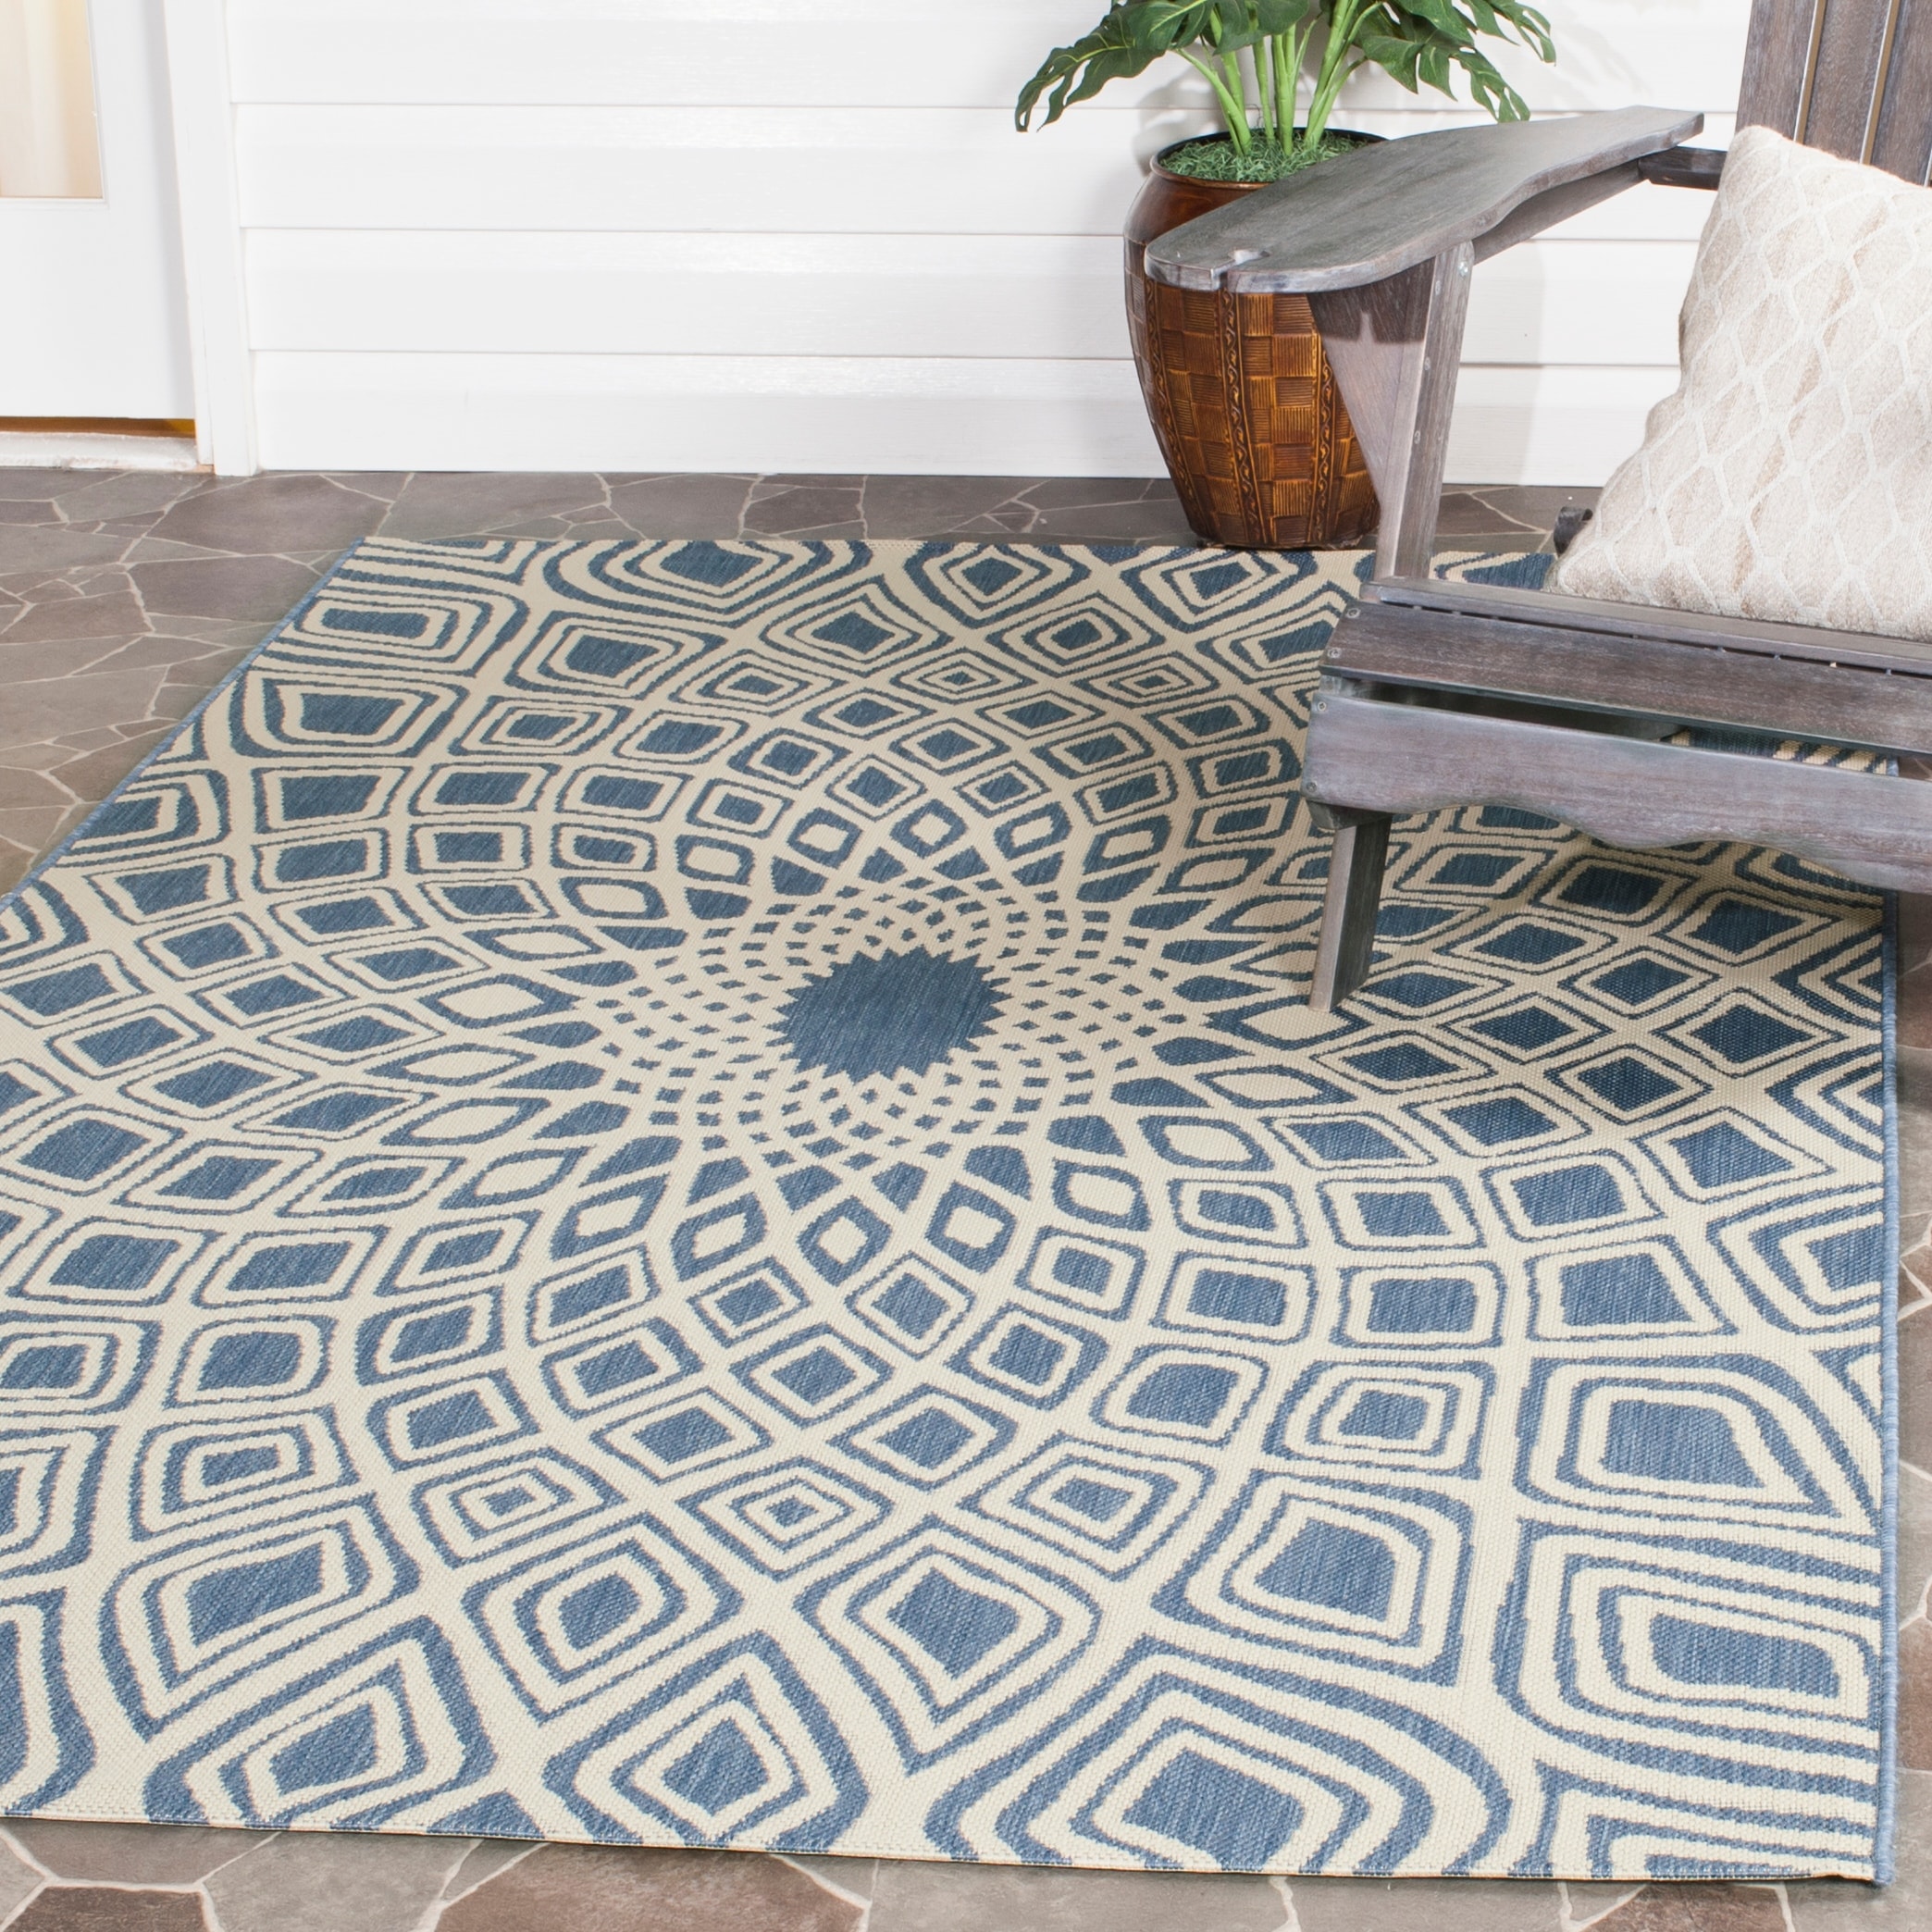 https://ak1.ostkcdn.com/images/products/is/images/direct/ad0f1e427ff3abe97db0f5d1603af9124c9093ab/SAFAVIEH-Courtyard-Marylyn-Indoor--Outdoor-Patio-Backyard-Rug.jpg